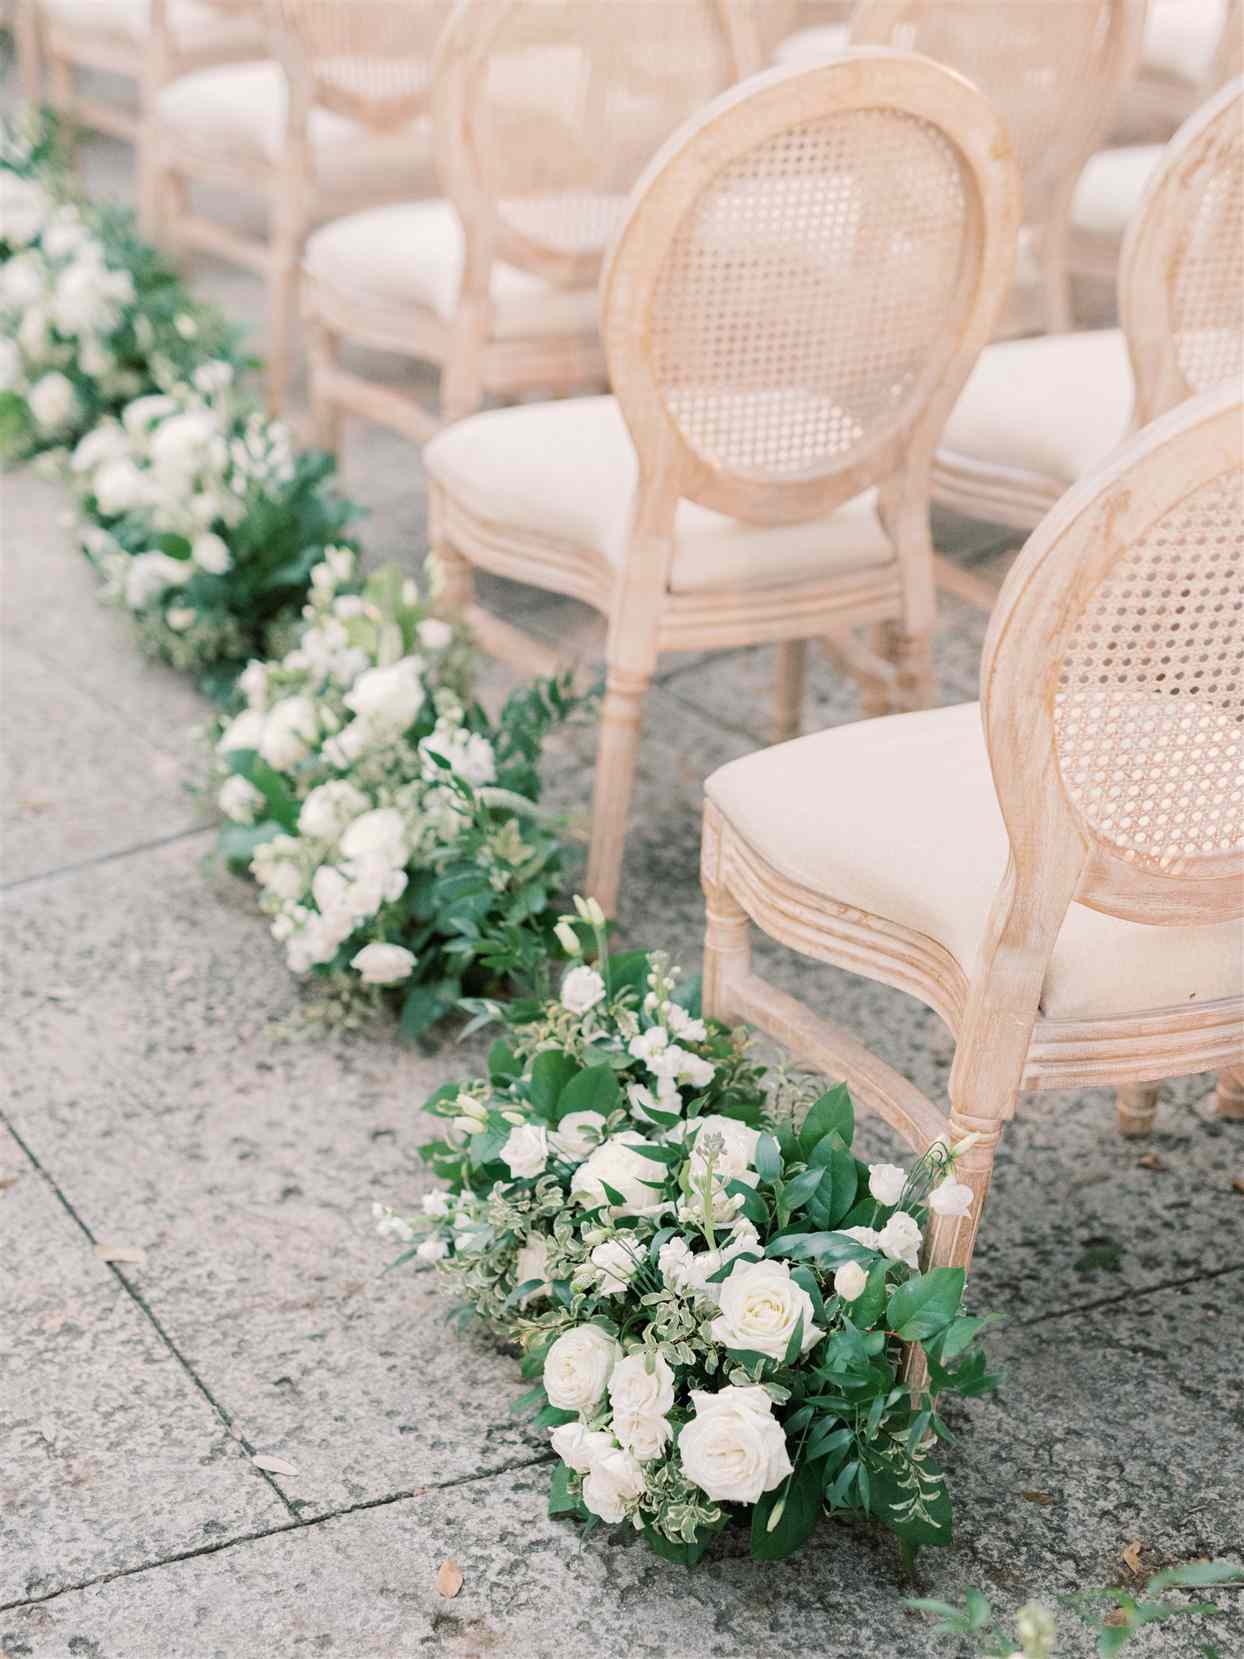 wedding ceremony aisles lined with greenery and white roses